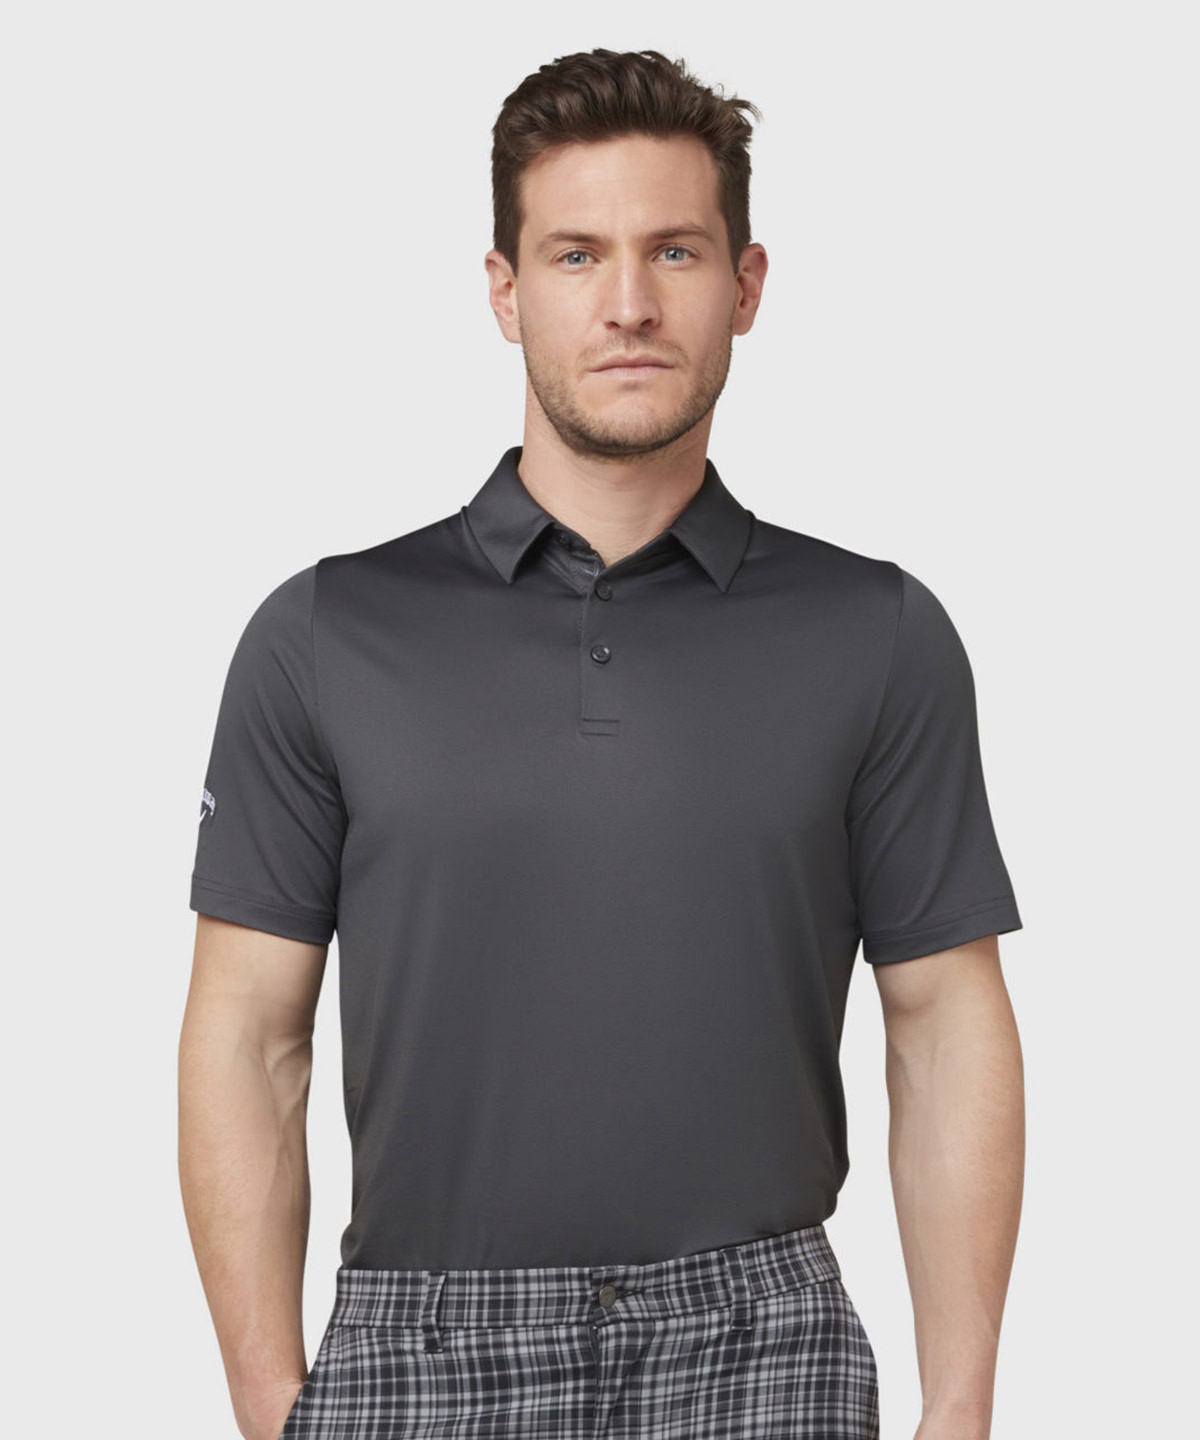 Nike Victory solid polo